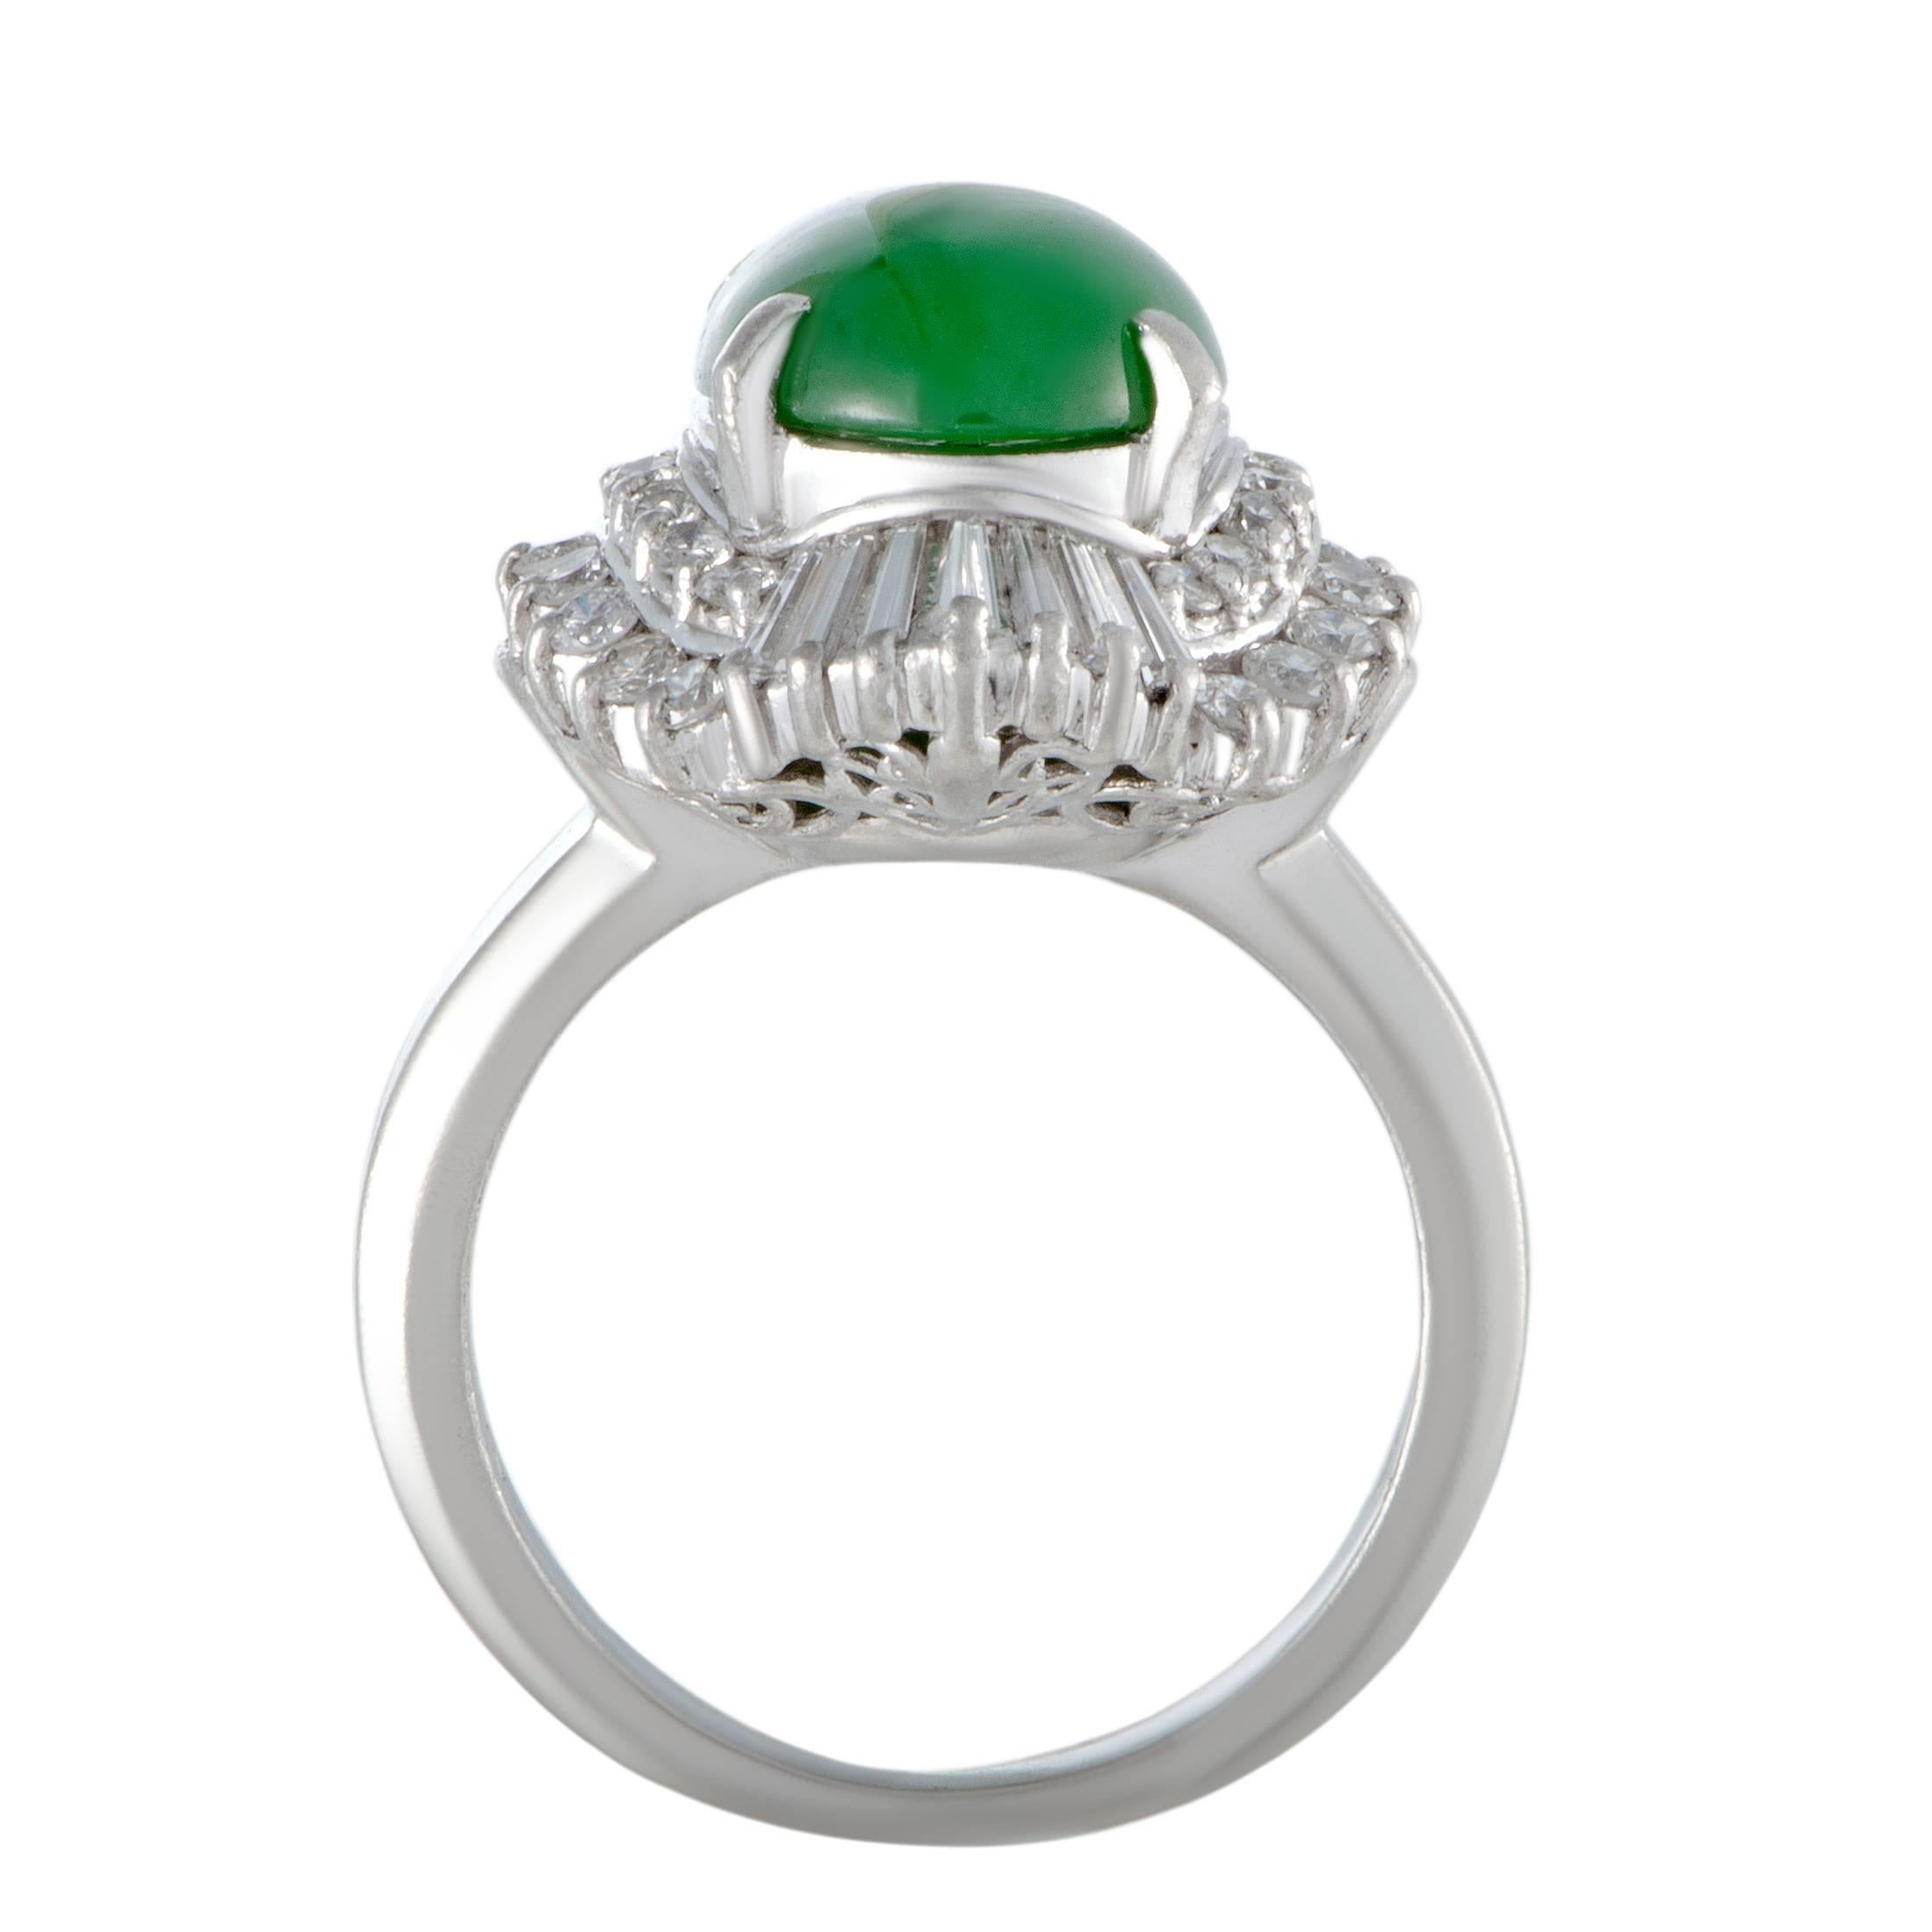 A plethora of endearingly resplendent diamonds beautifully accentuates the stunning green jade in this fabulous ring that is expertly crafted from luxurious platinum. The diamonds weigh in total 0.88 carats, while the jade weighs 3.79 carats.
Ring